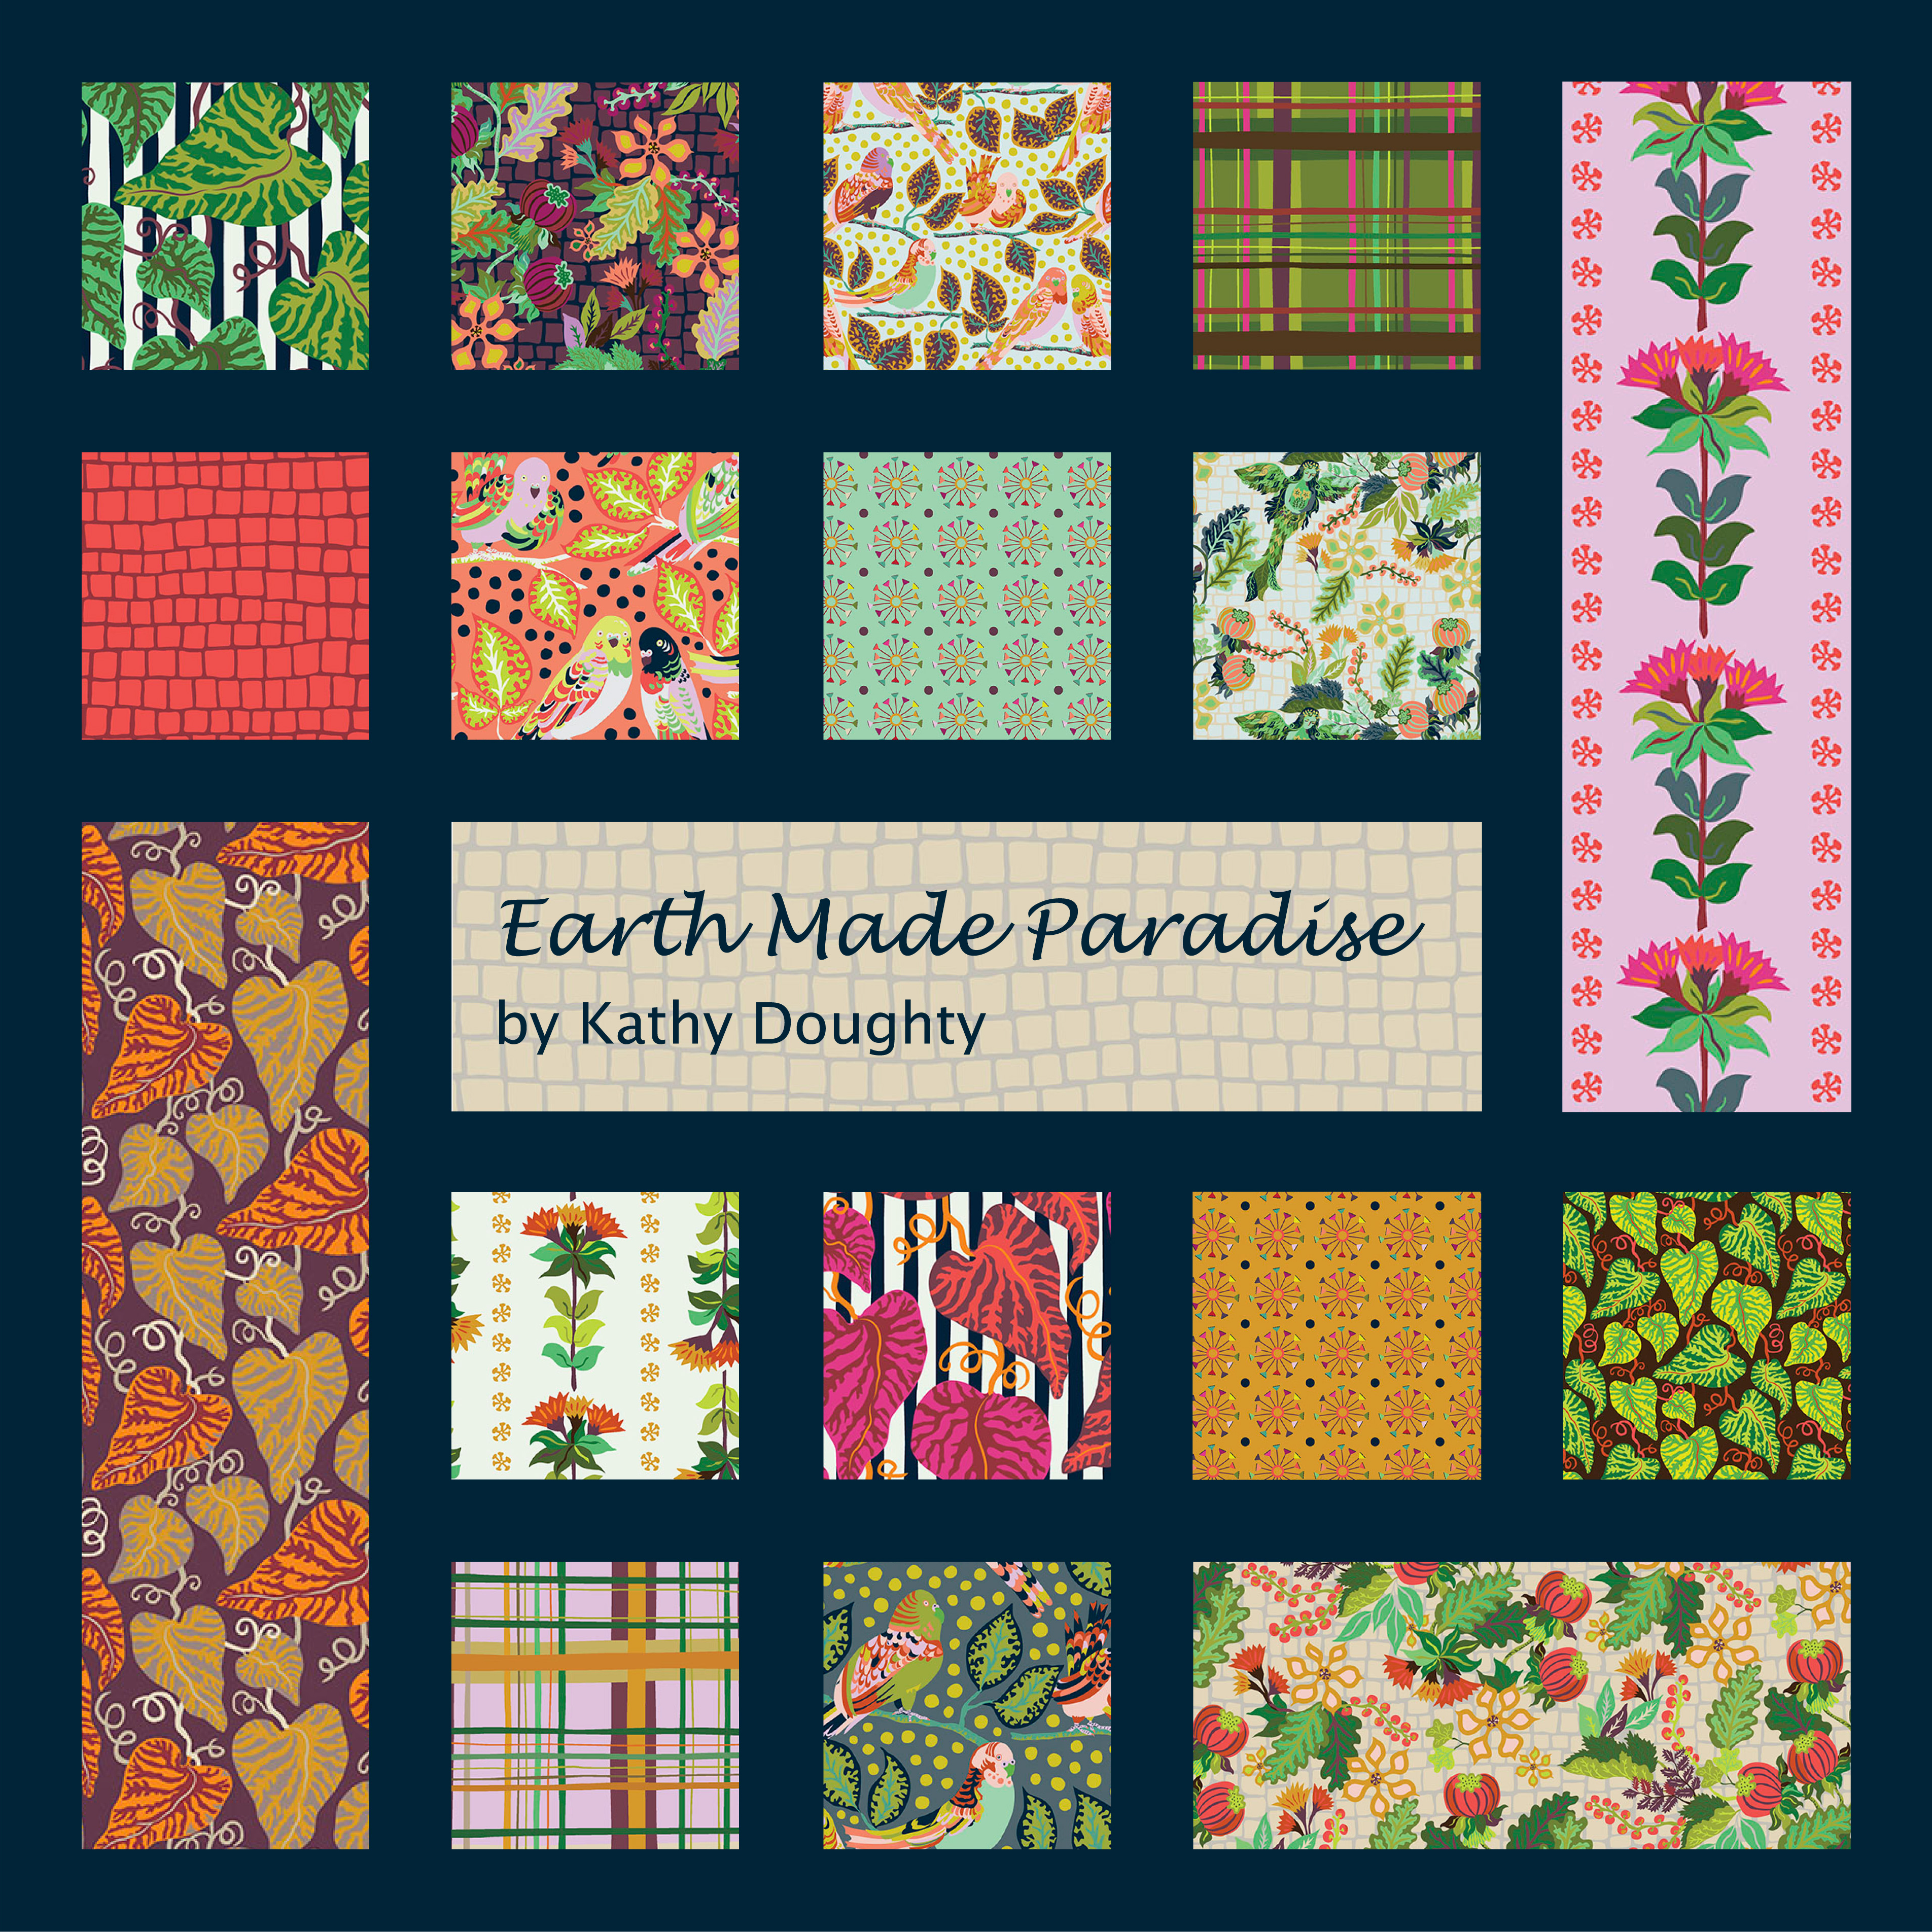 Earth Made Paradise by Kathy Doughty